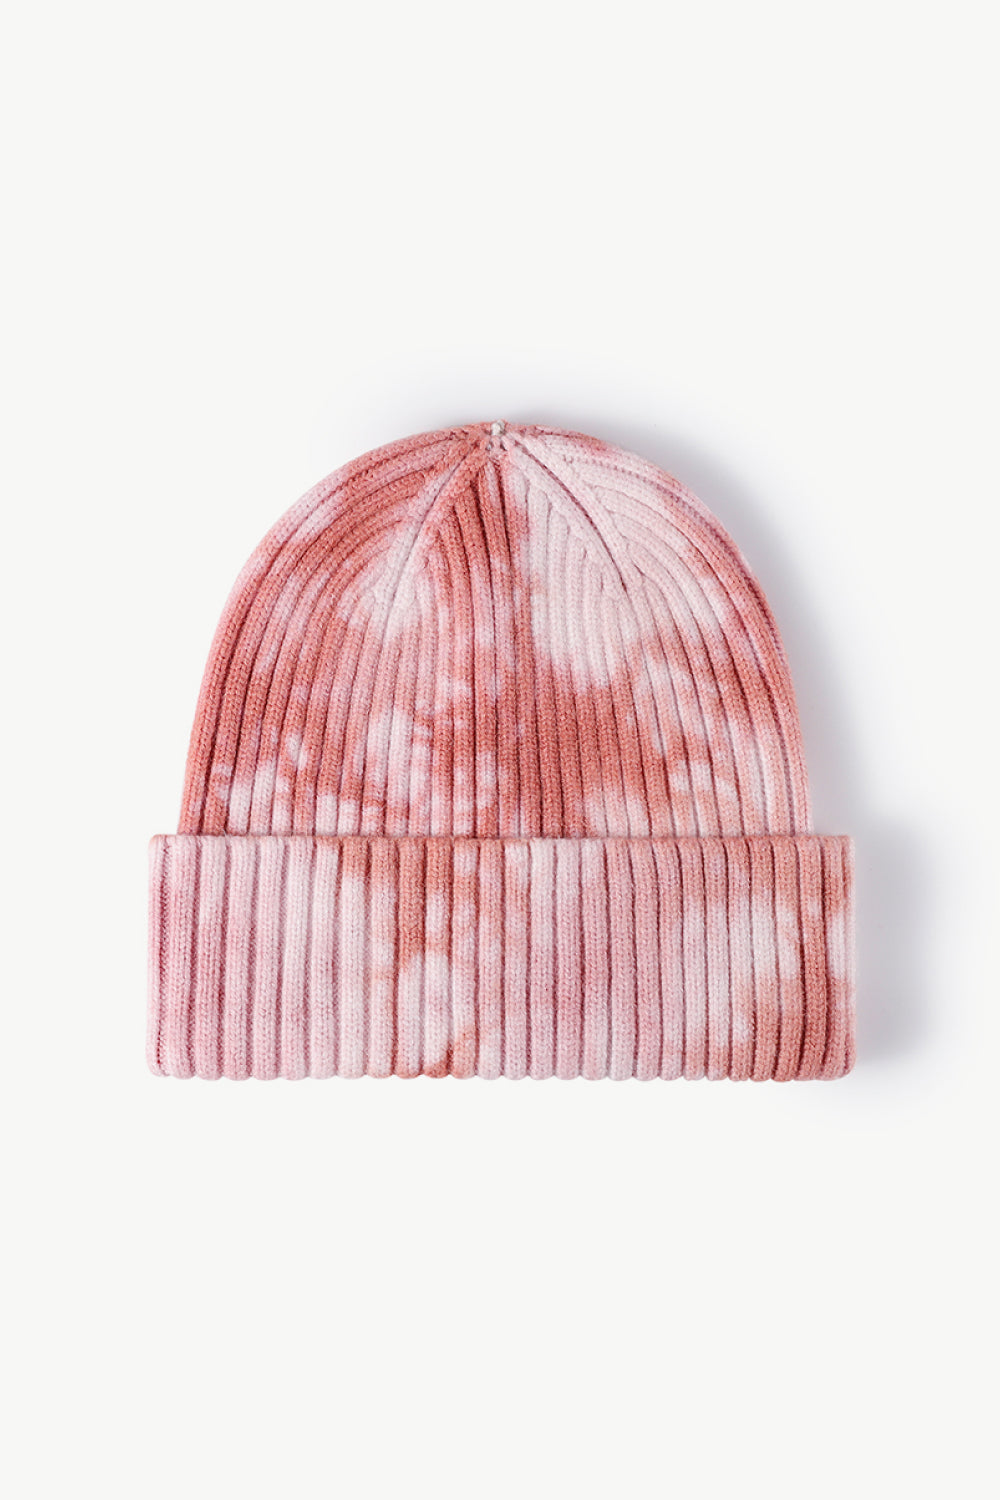 Red Unisex Tie Dye Beanie Hat, Athletic Accessories and Fitness Accessory